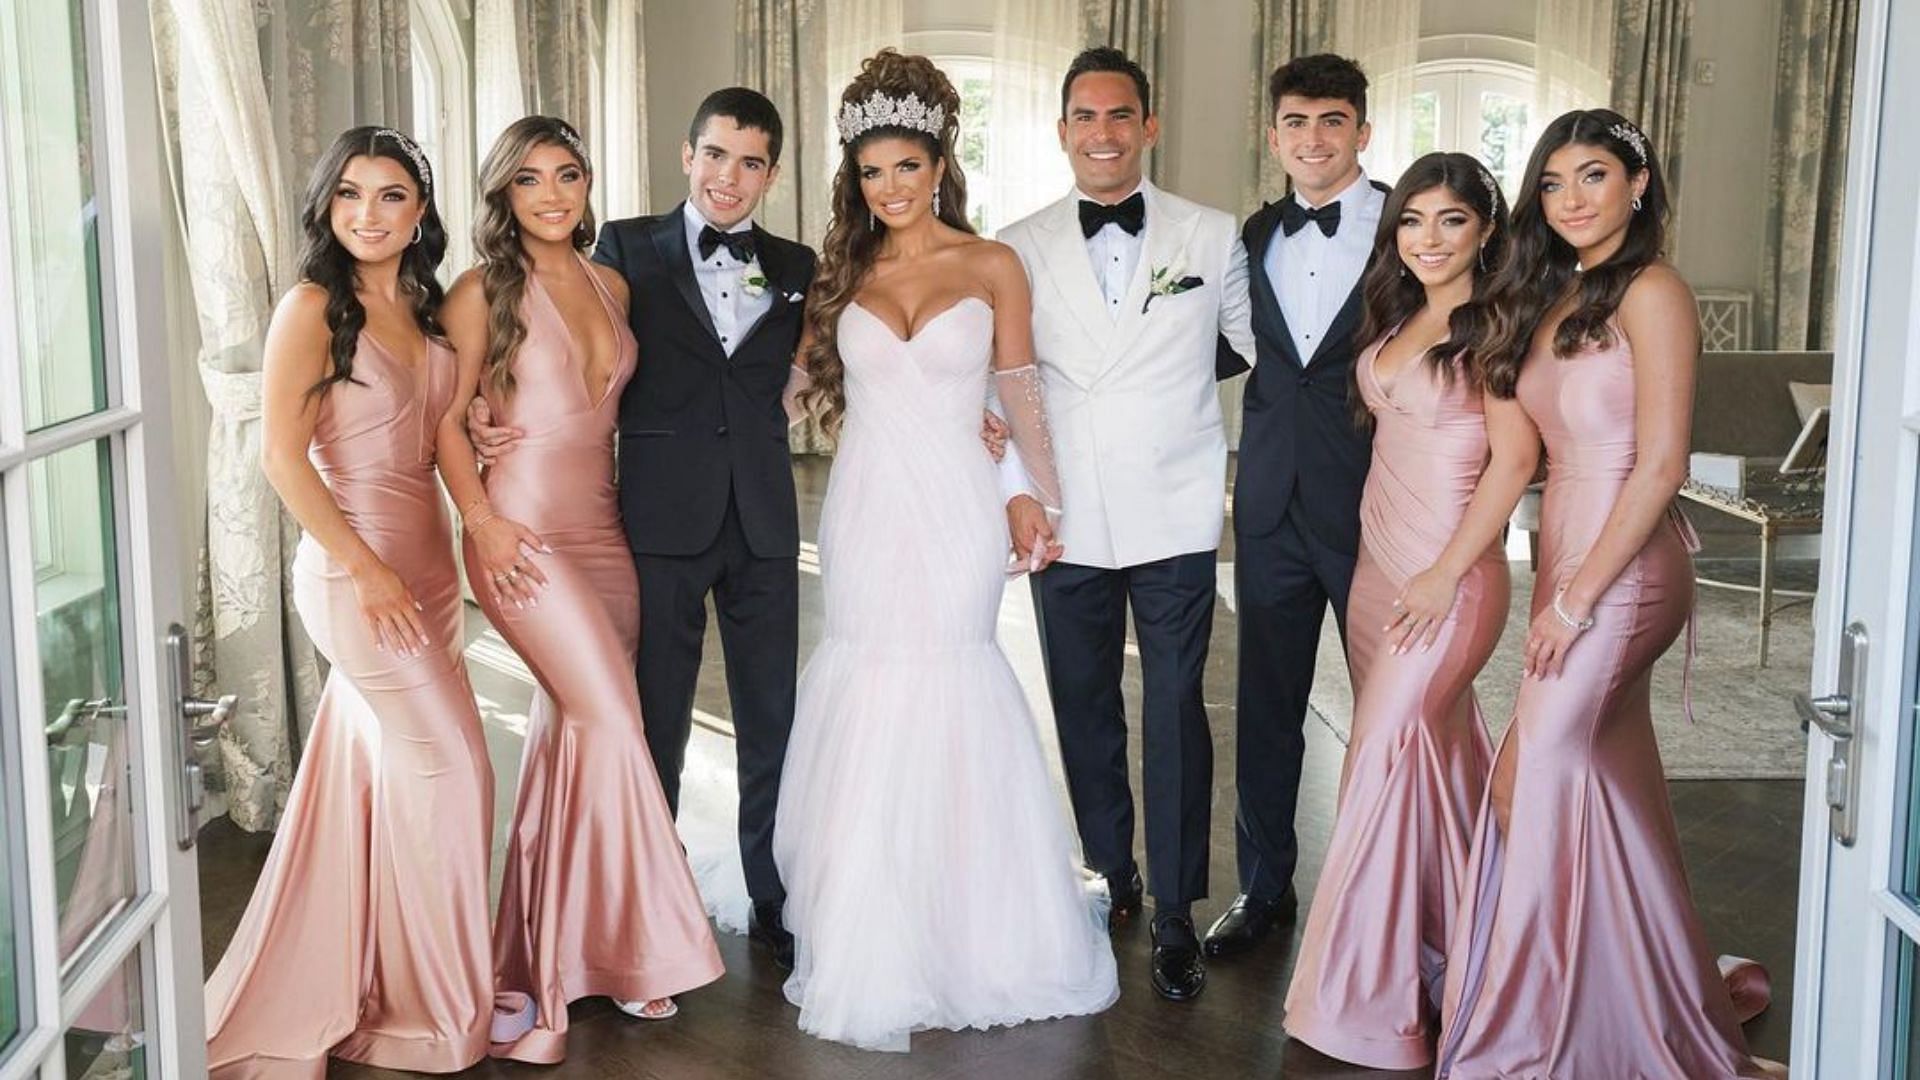 RHONJ special episode Teresa Gets Married airs this Tuesday